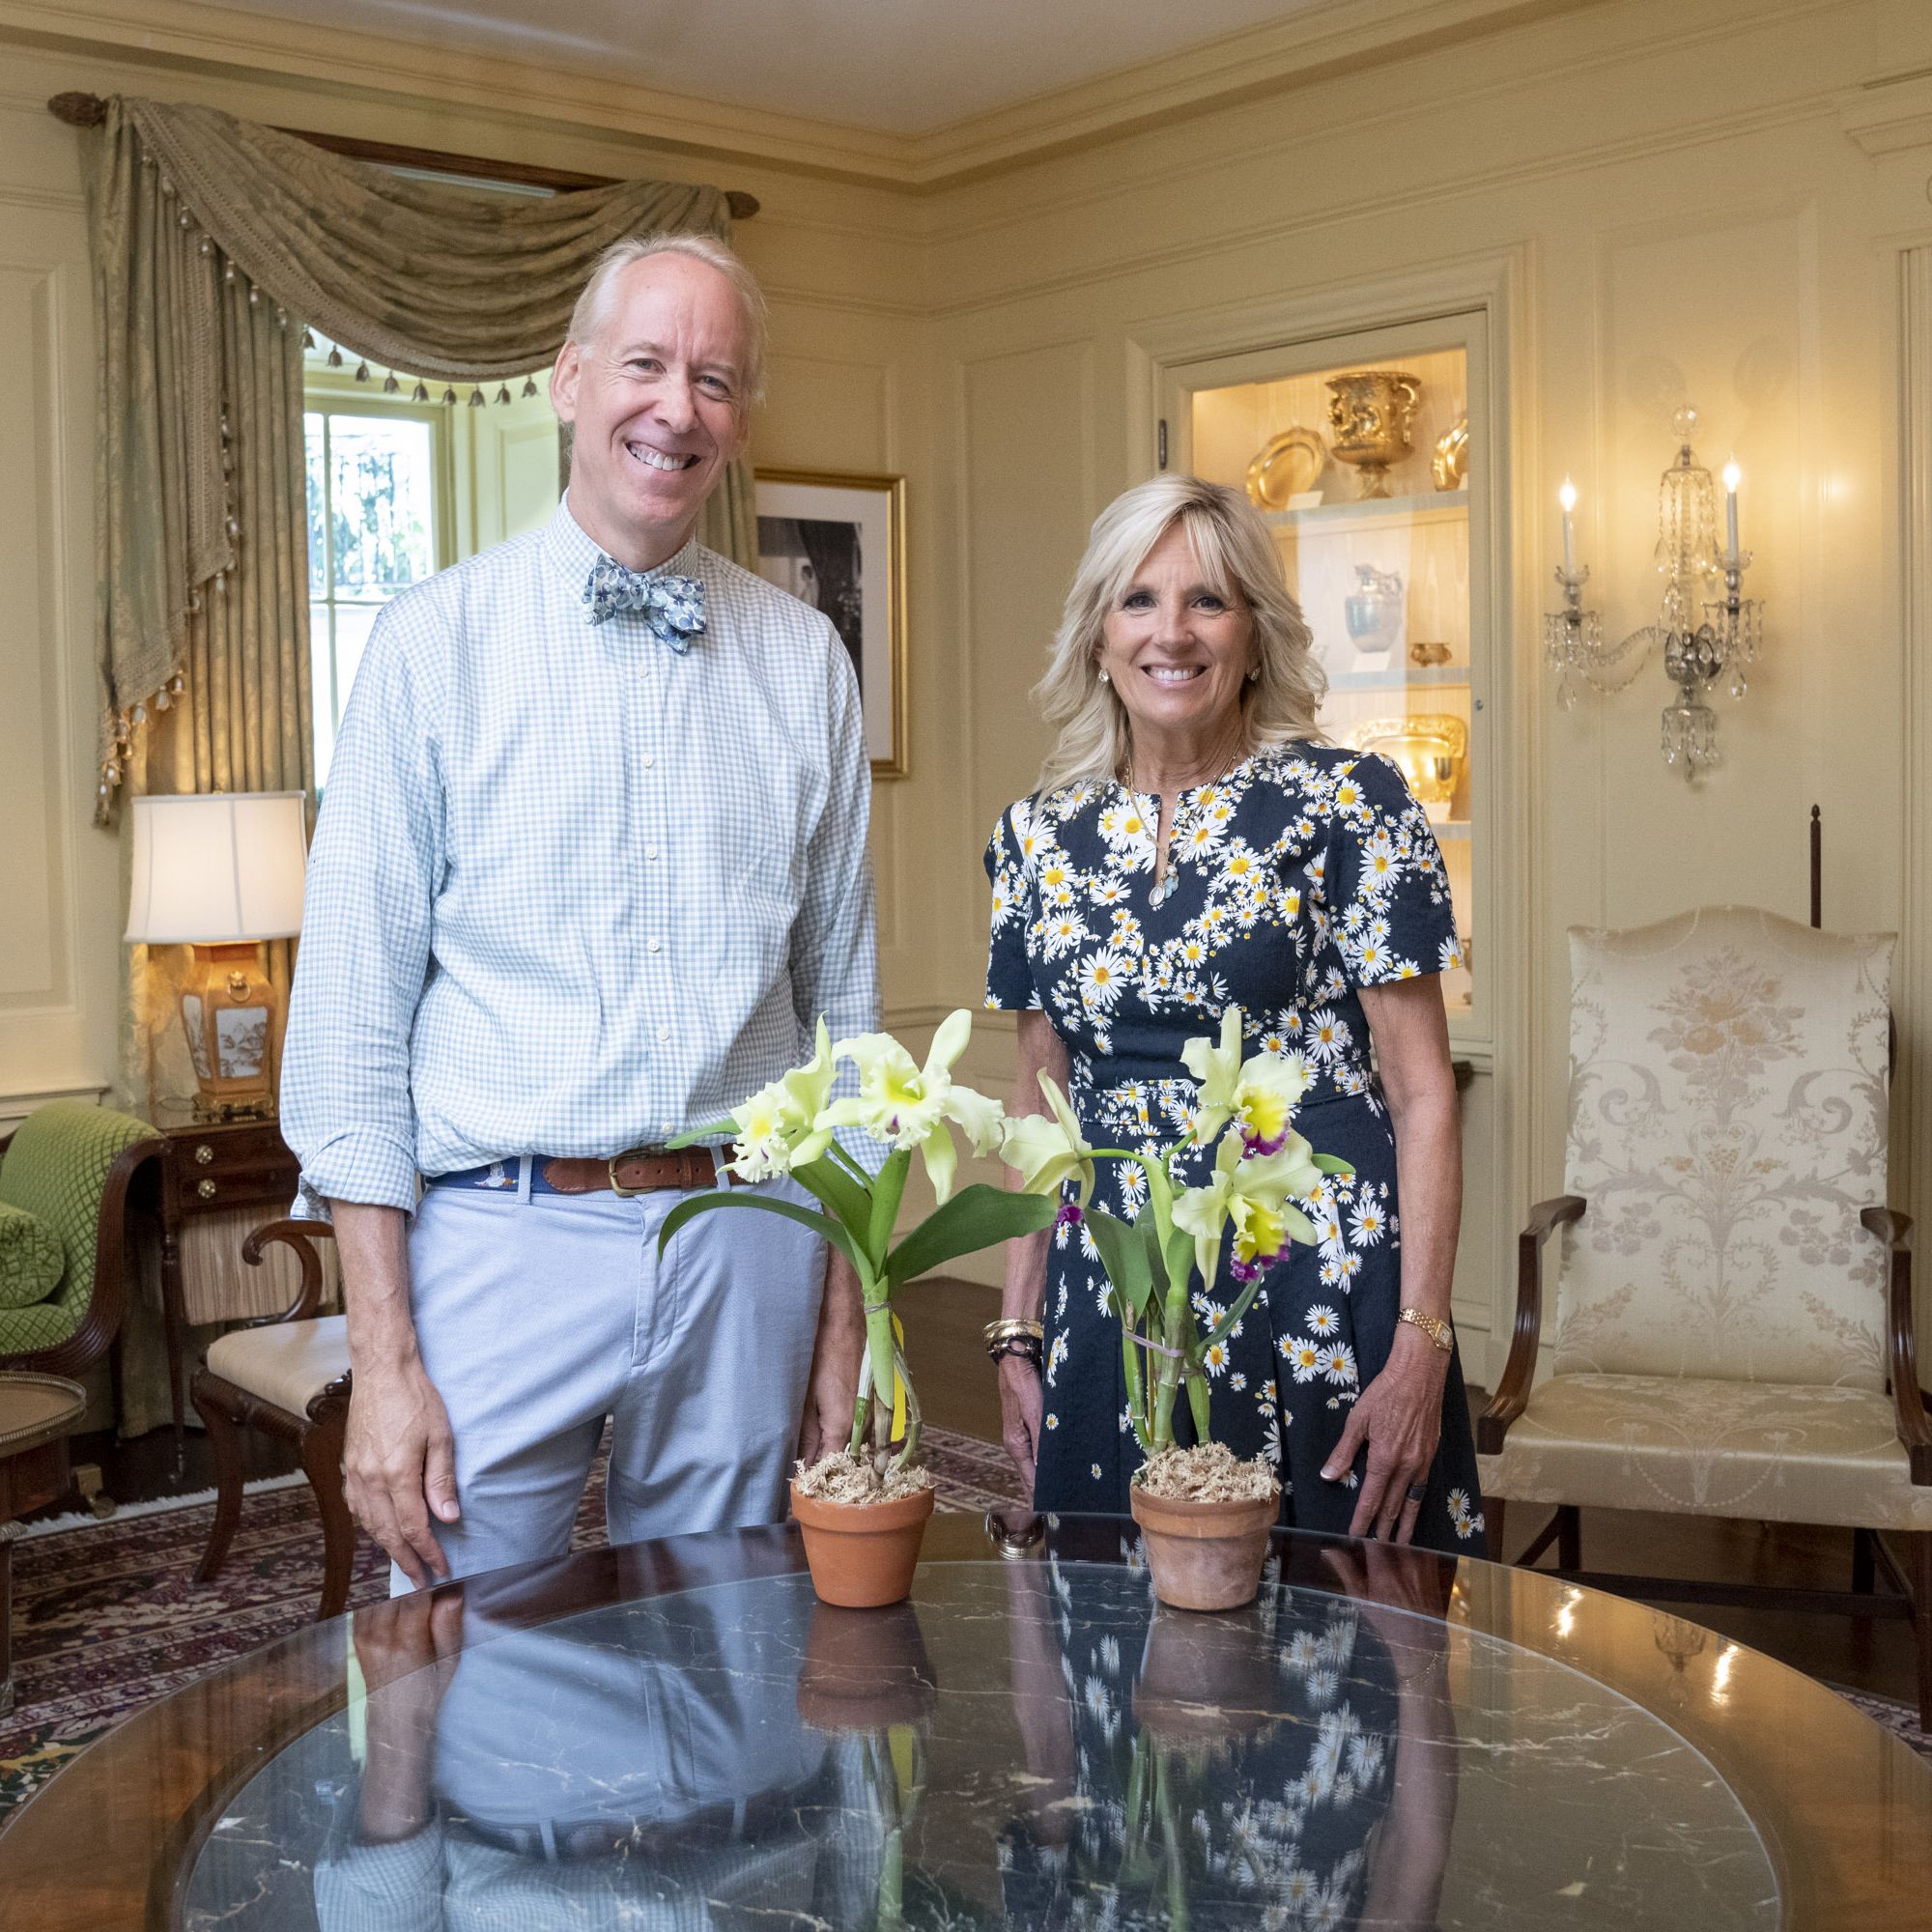 Dr. Jill Biden Is the 19th Consecutive First Lady to Receive Her Namesake Orchid